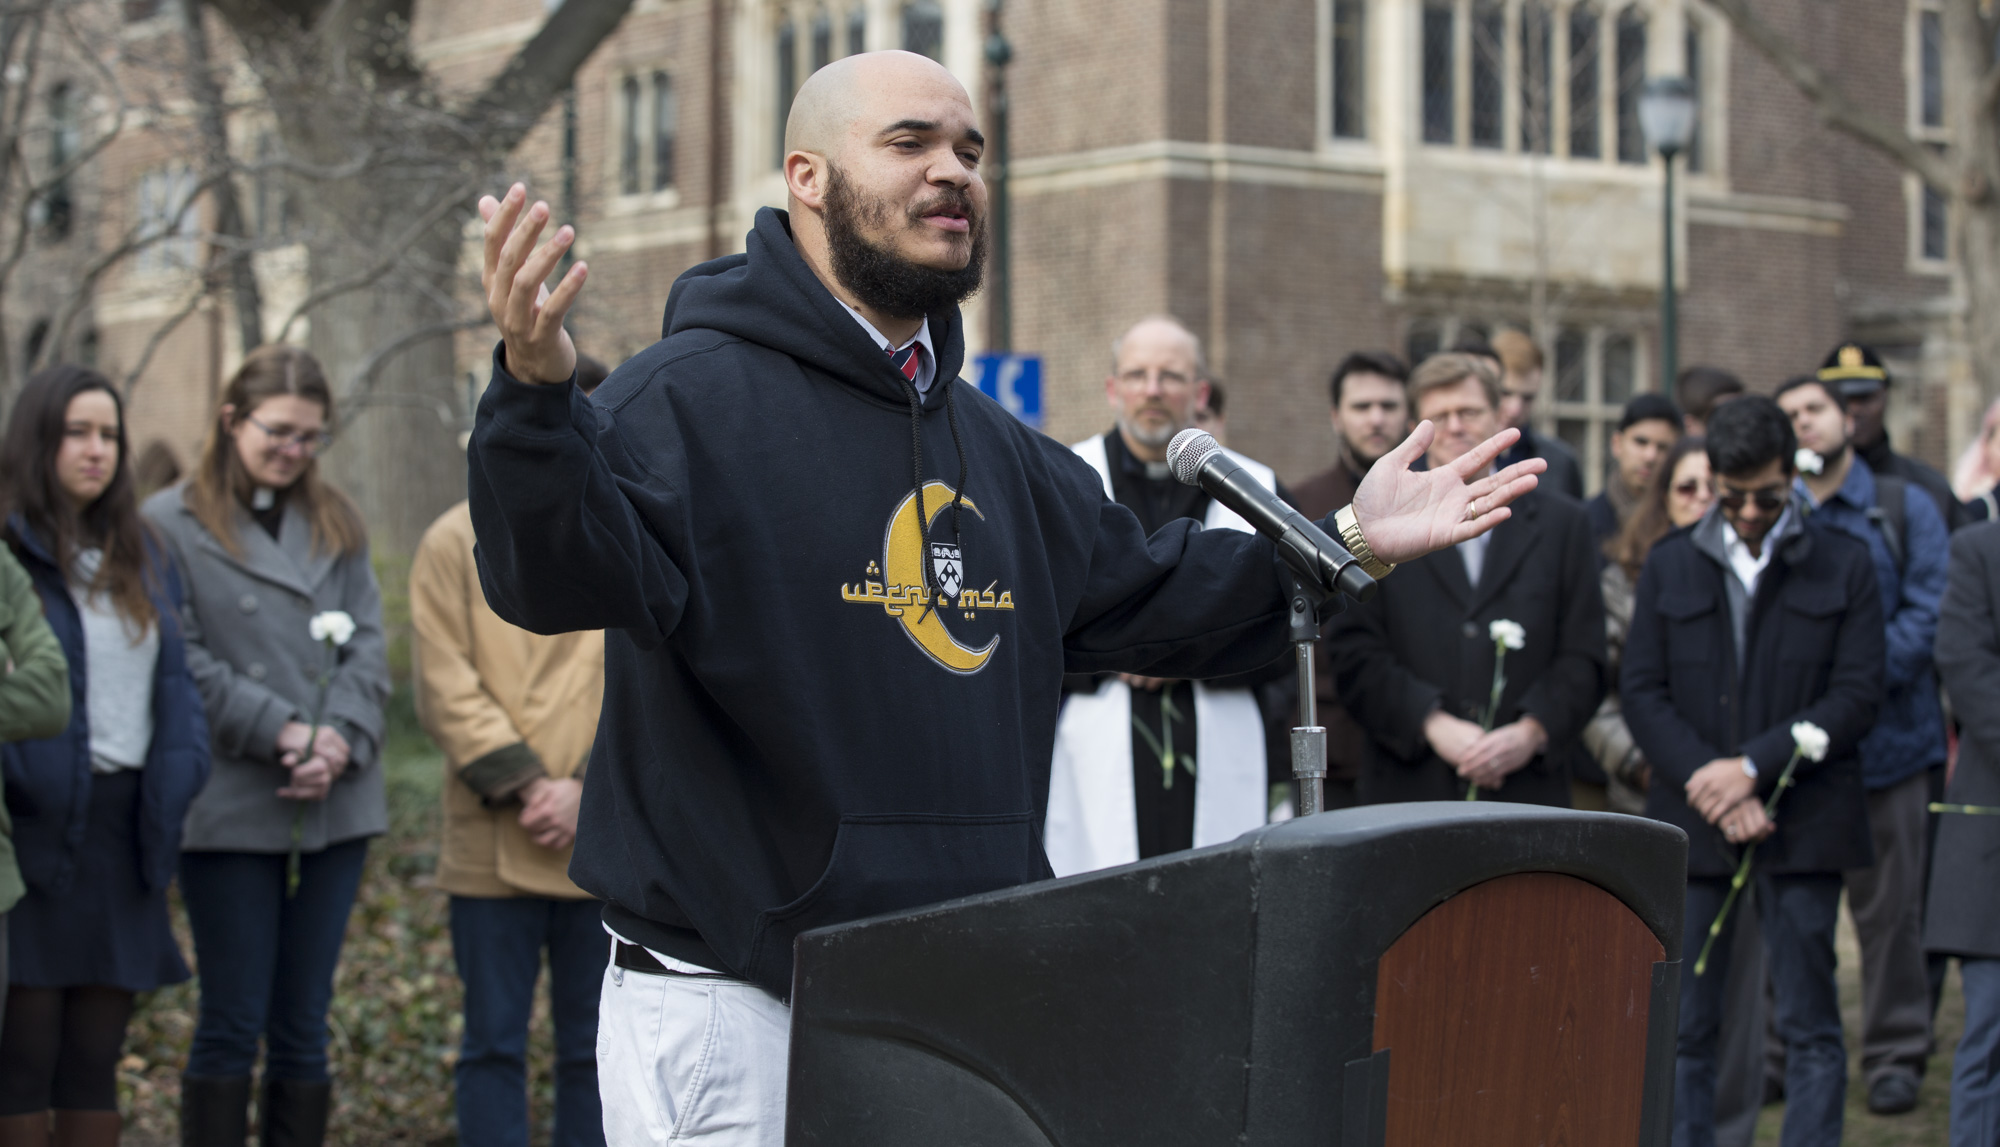 Reverend Charles Howard conducts an interfaith service on College Green